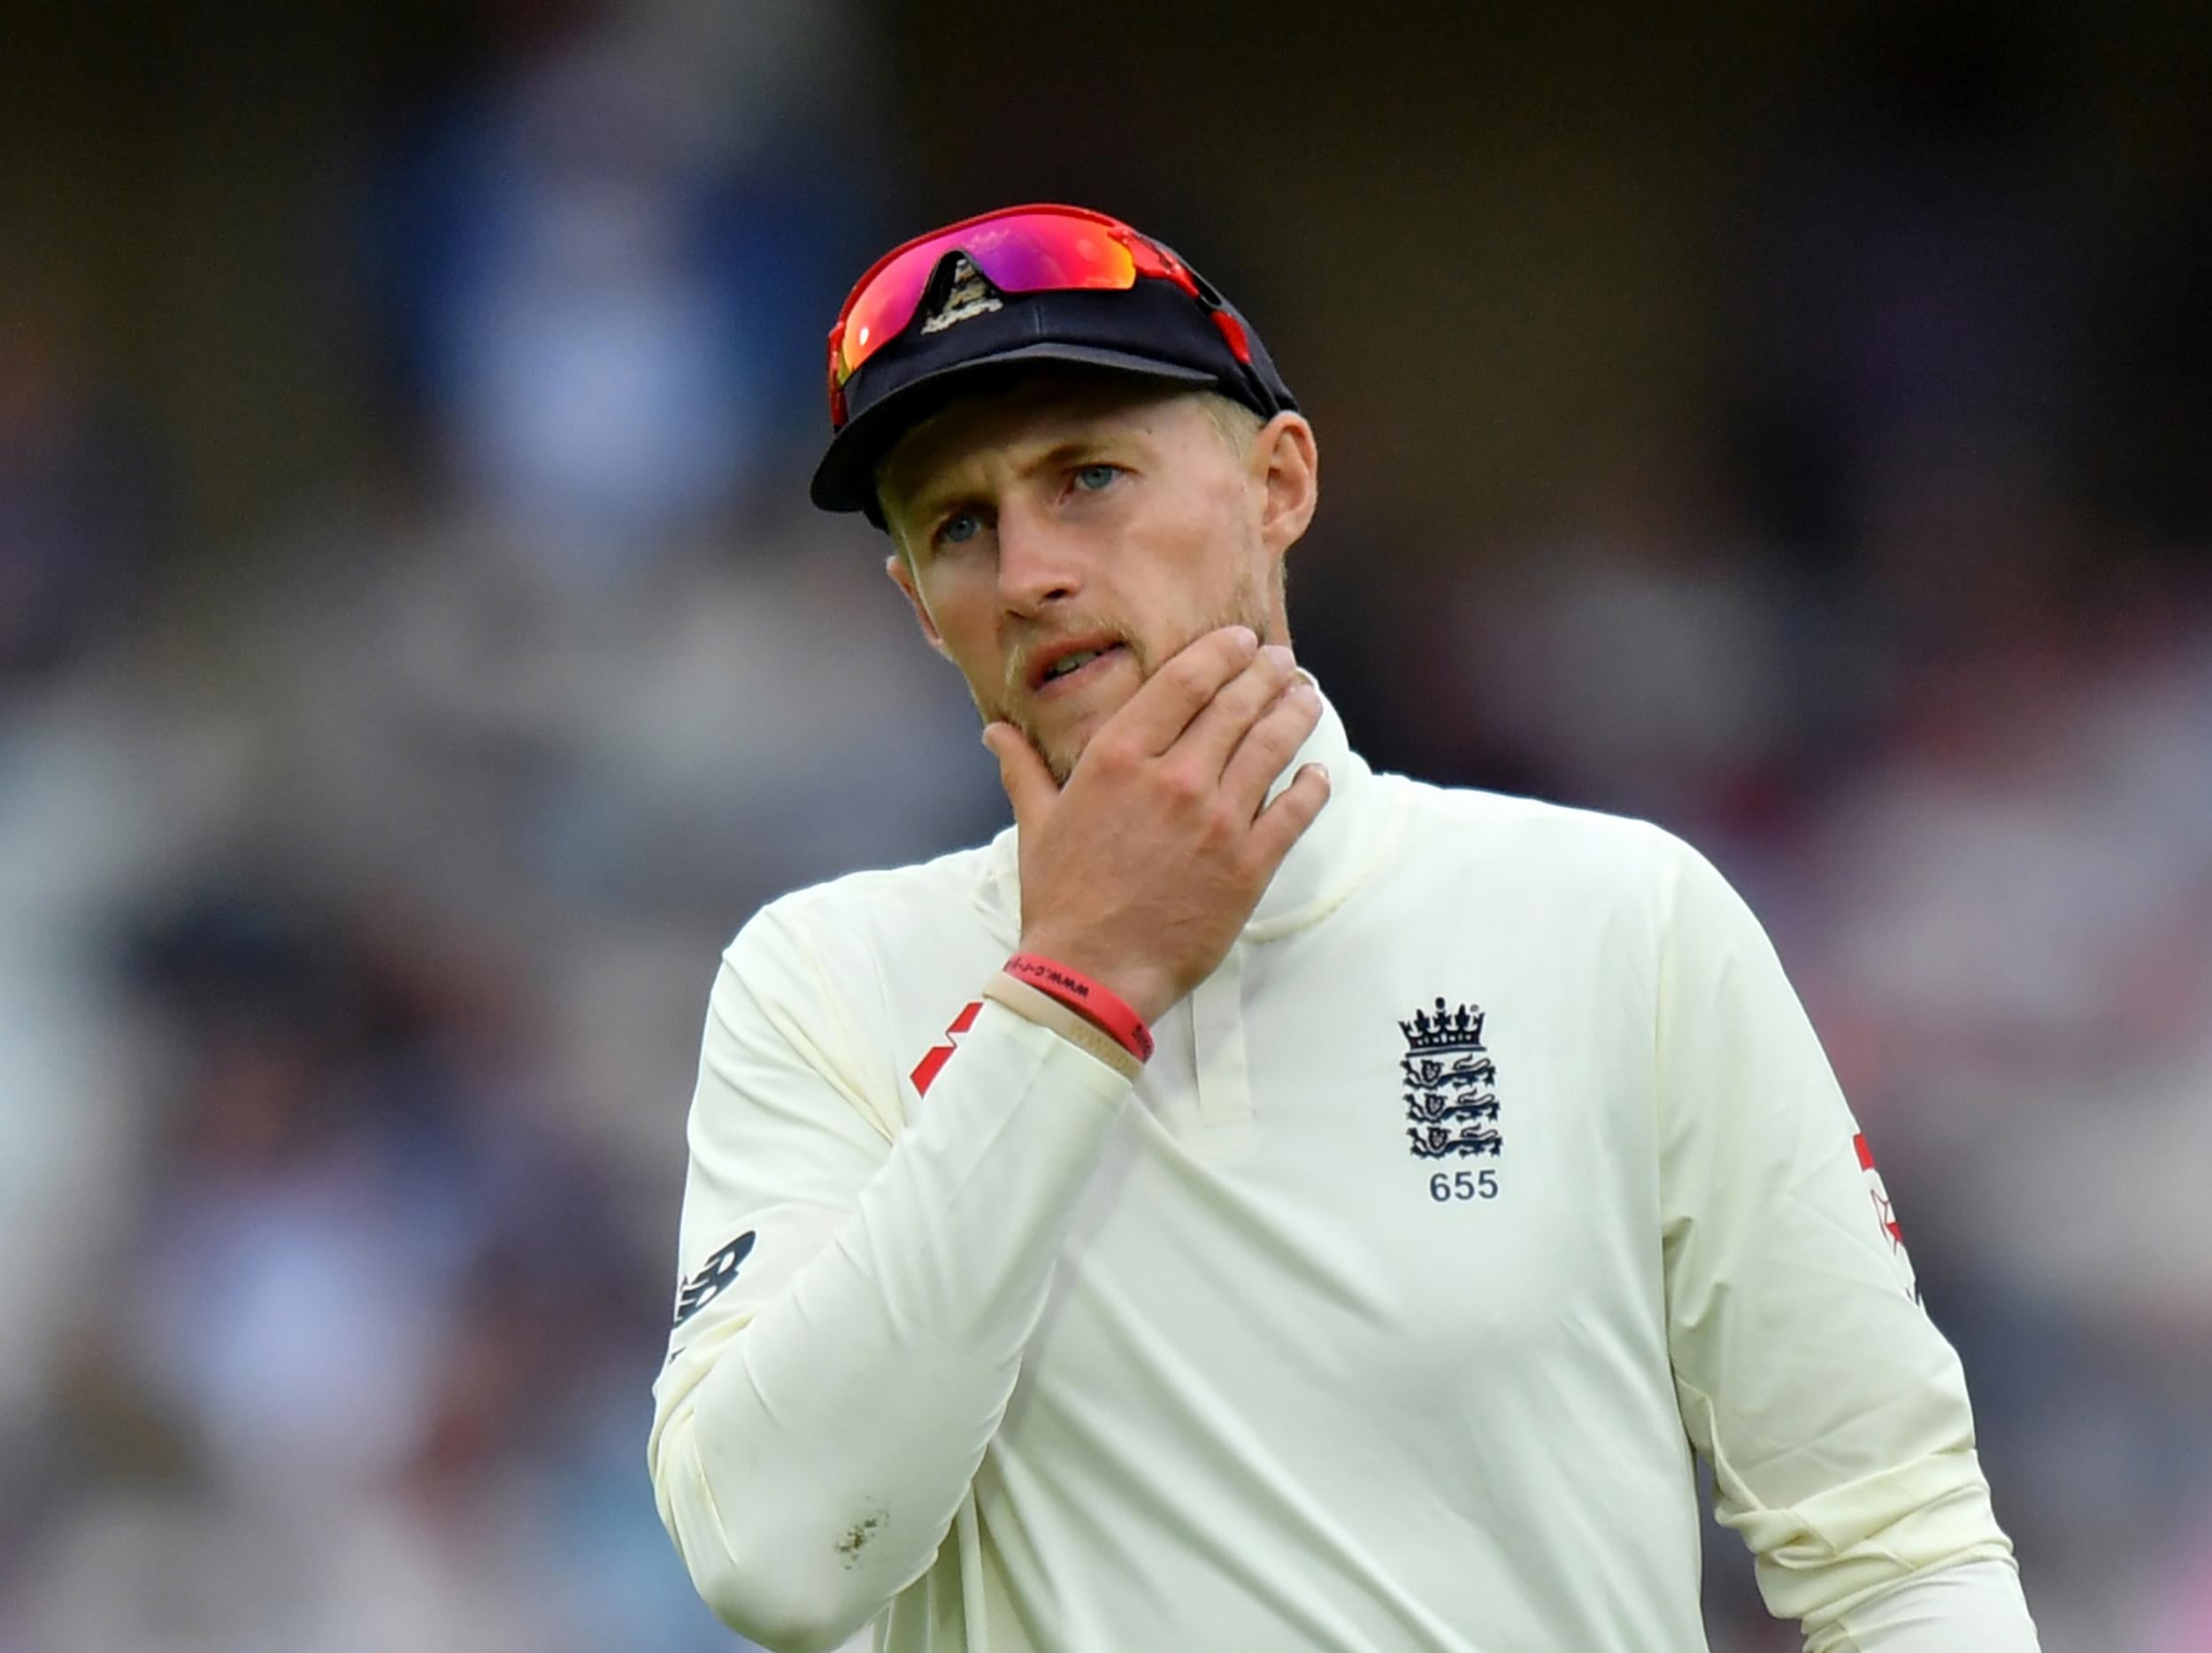 England now face defeat in the second Test against South Africa